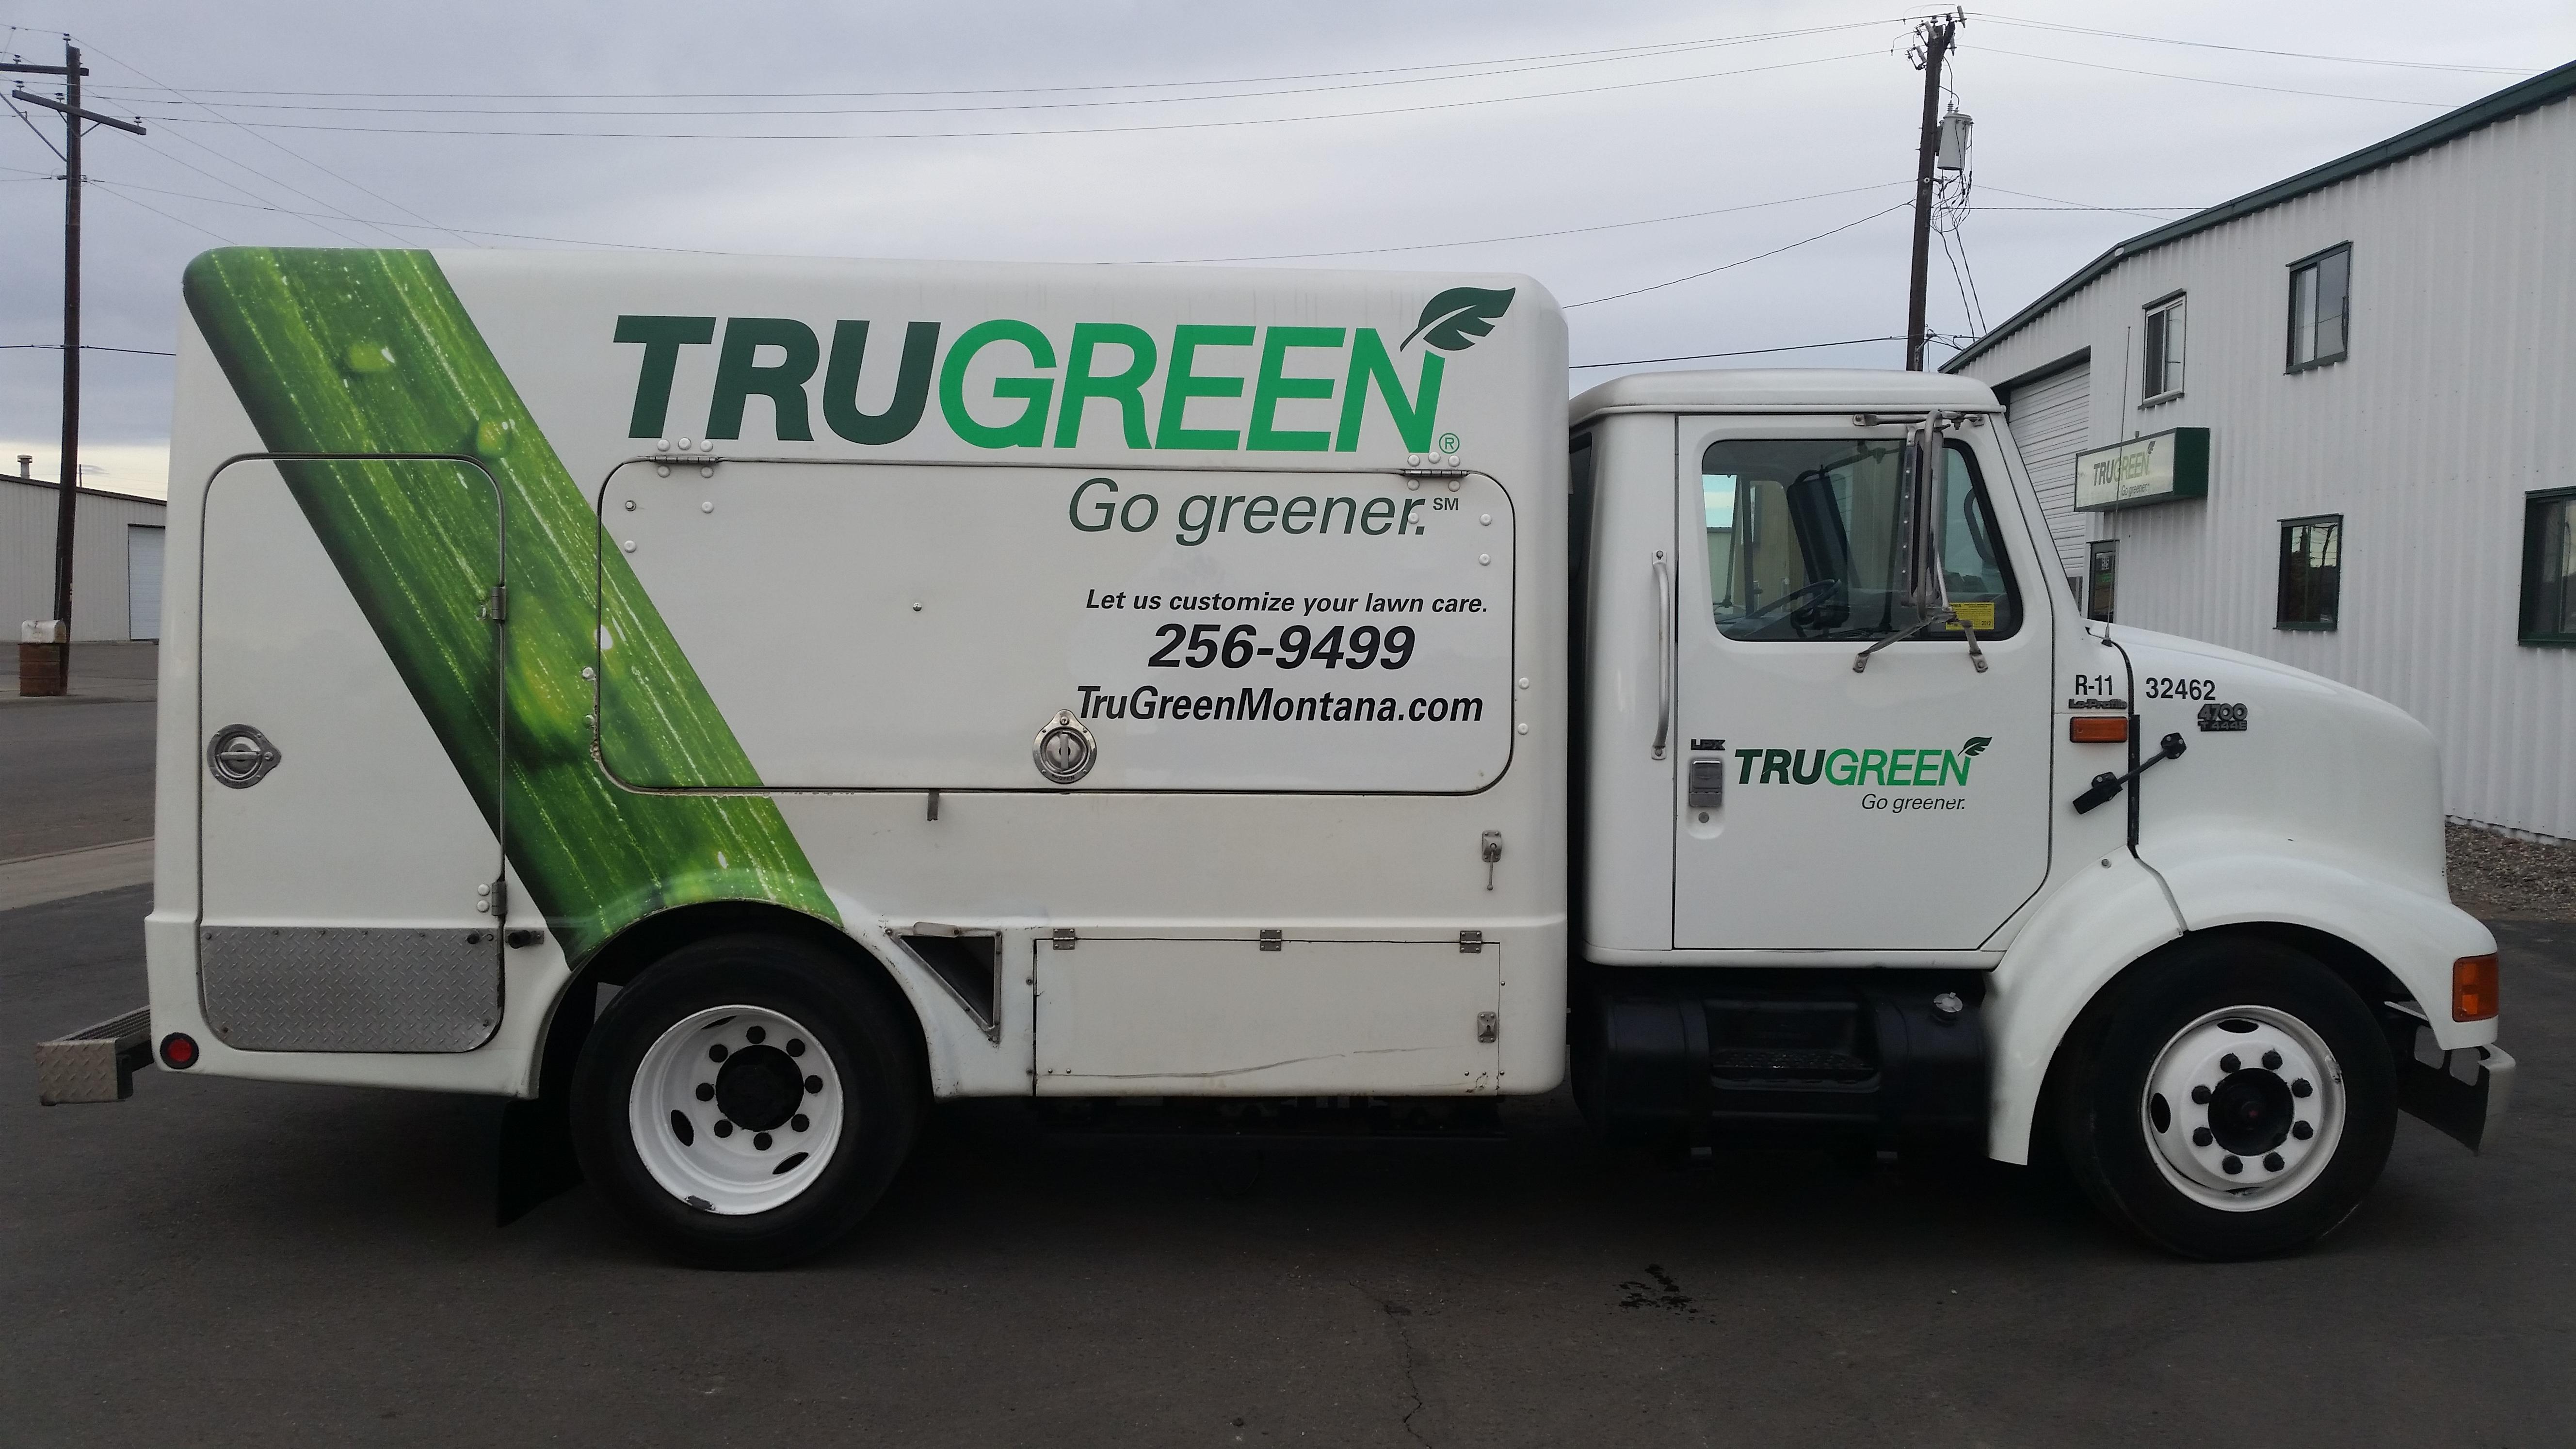 TruGreen Coupons near me 8coupons